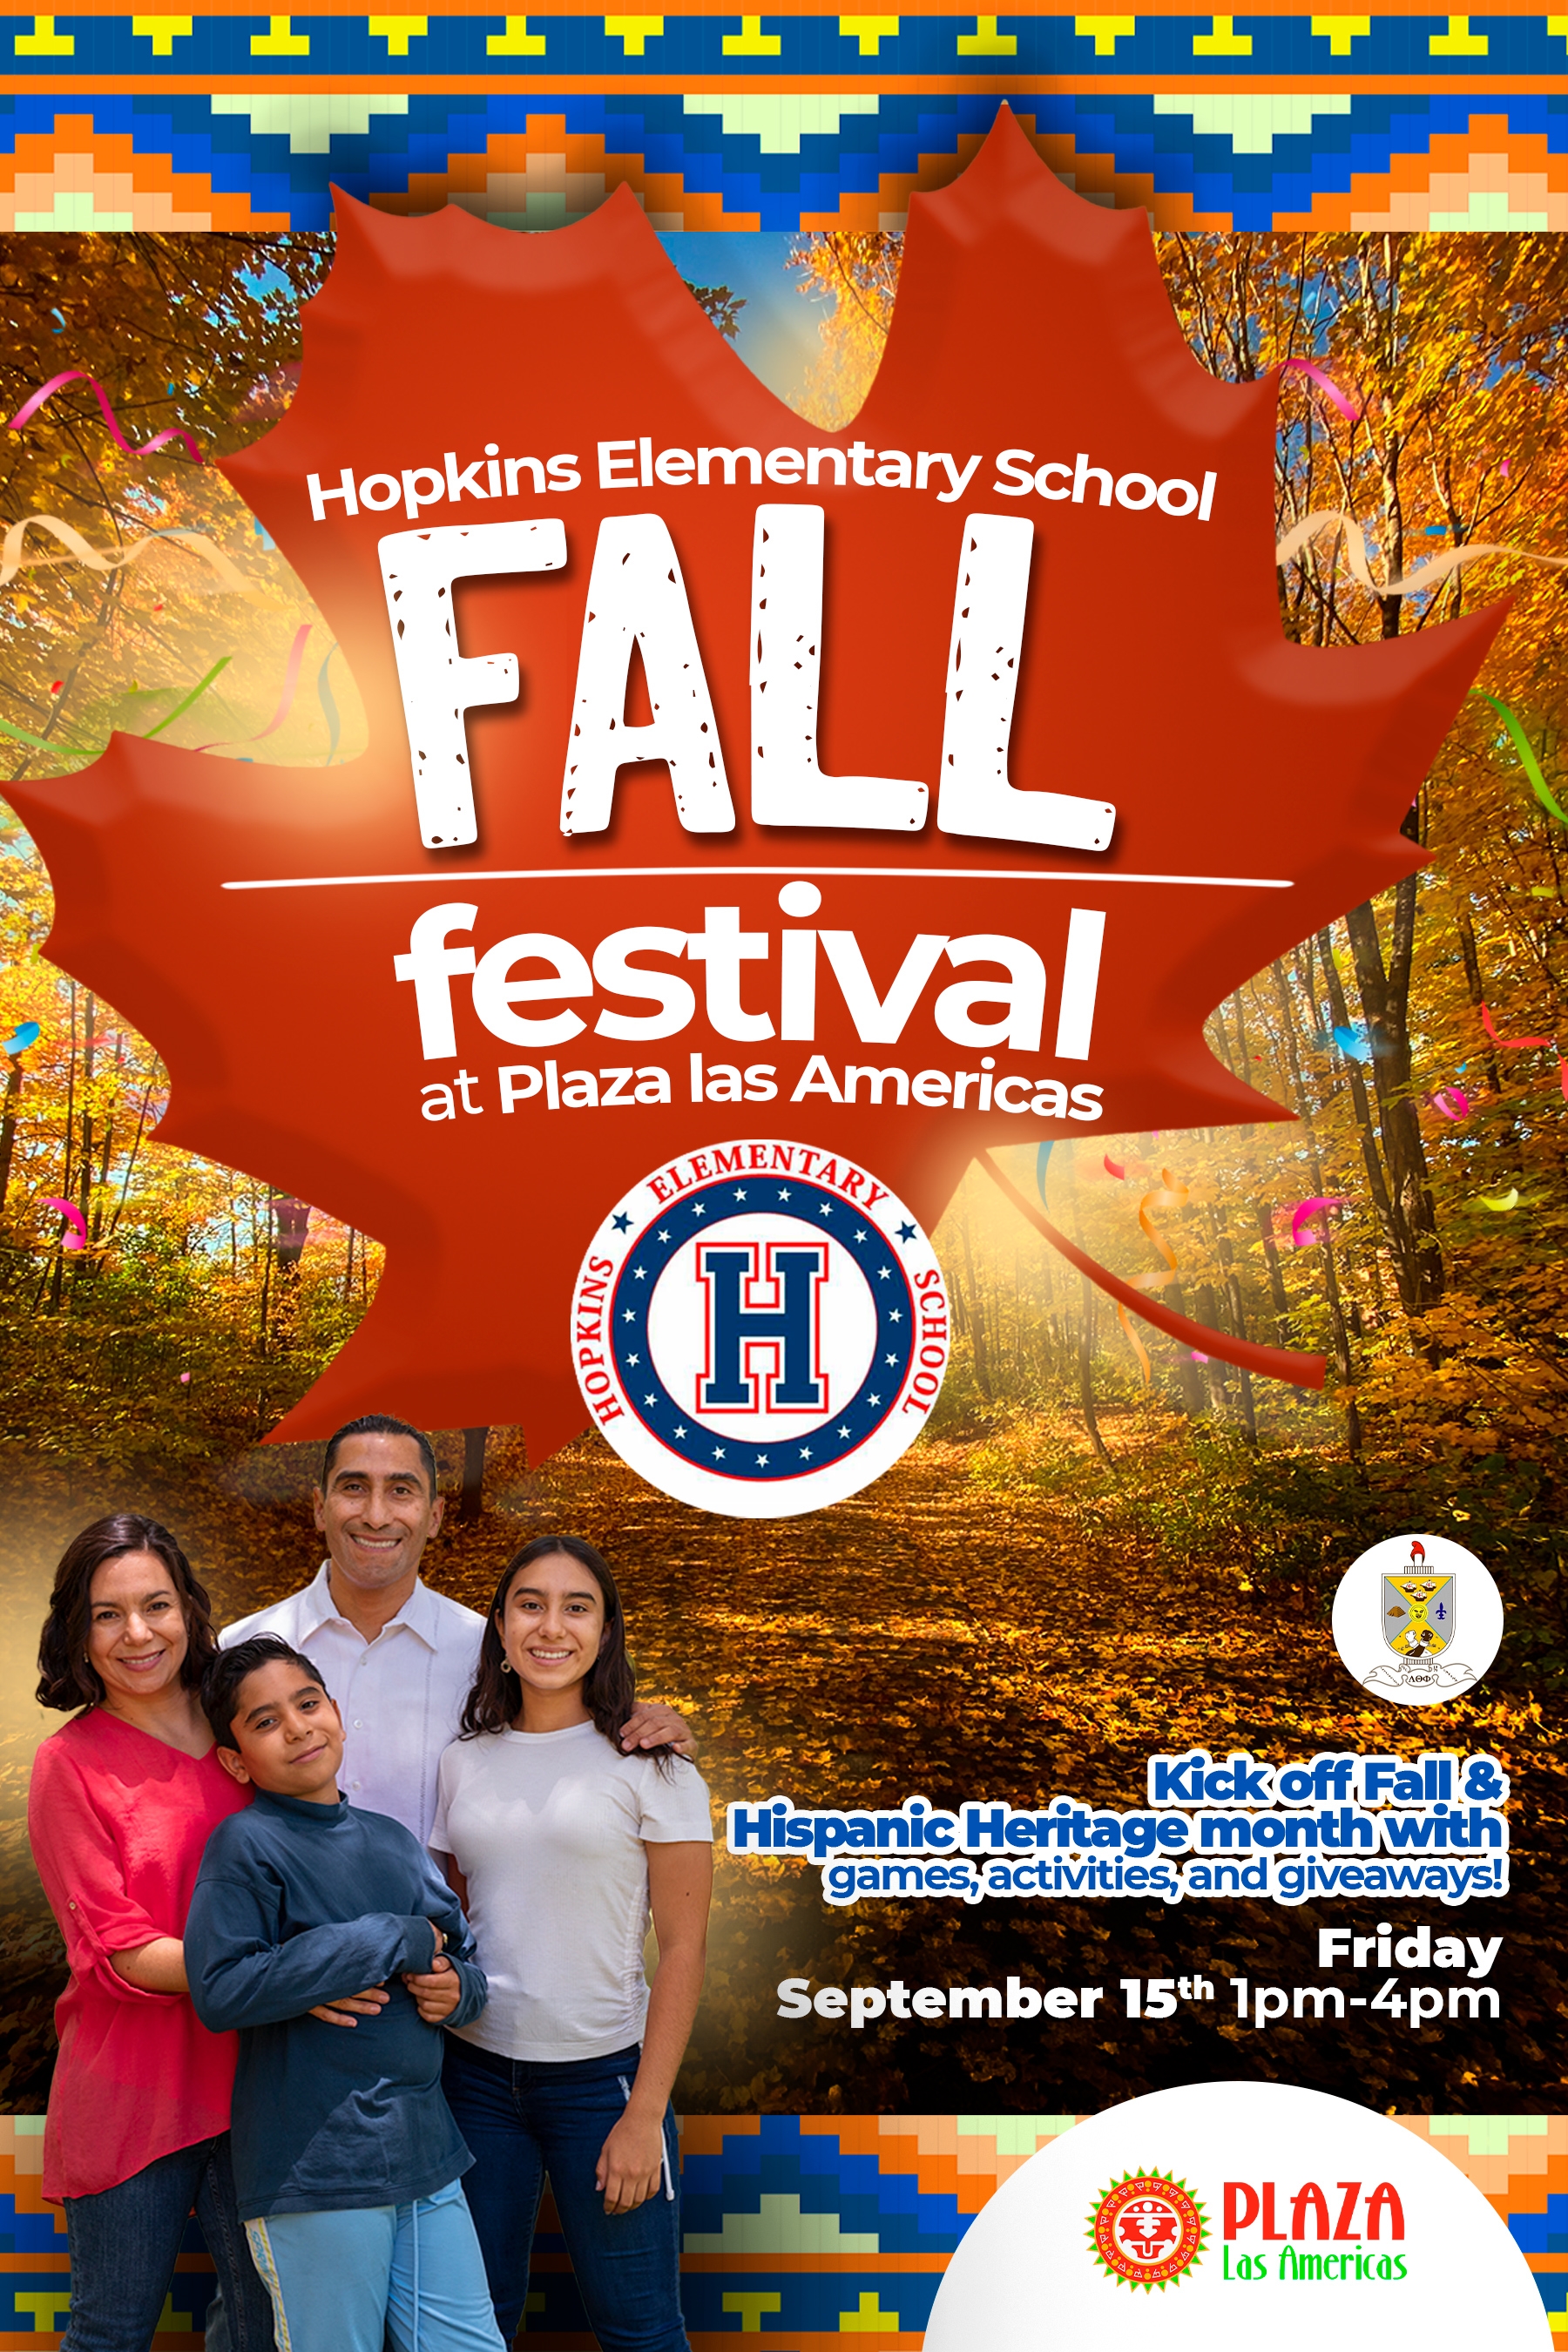 Hopkins Elementary School Fall Festival at Plaza Las Americas. Friday, September 15th from 1:00PM - 4:00PM